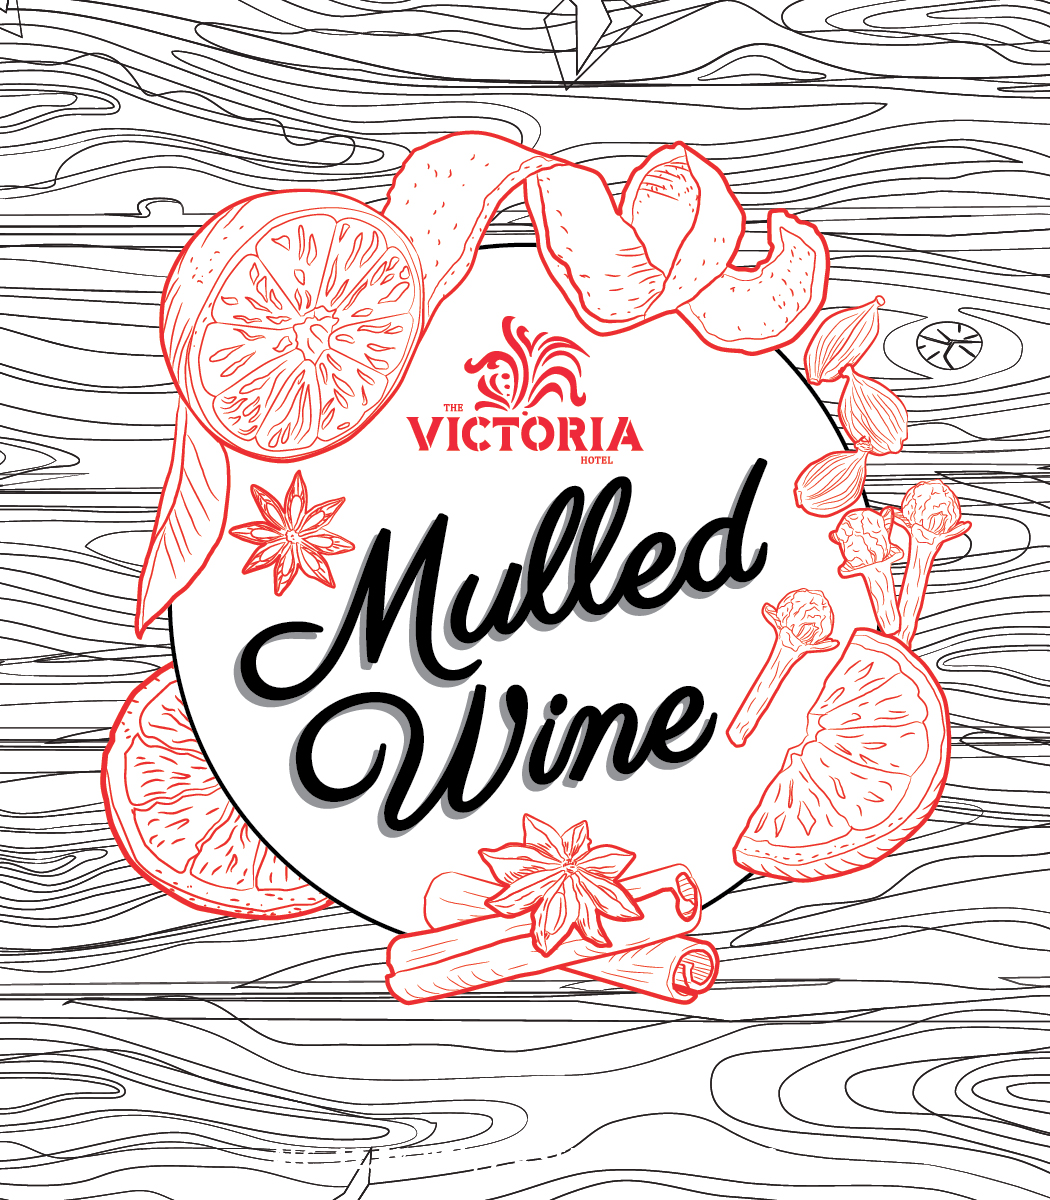 Mulled Wine - The Victoria Hotel